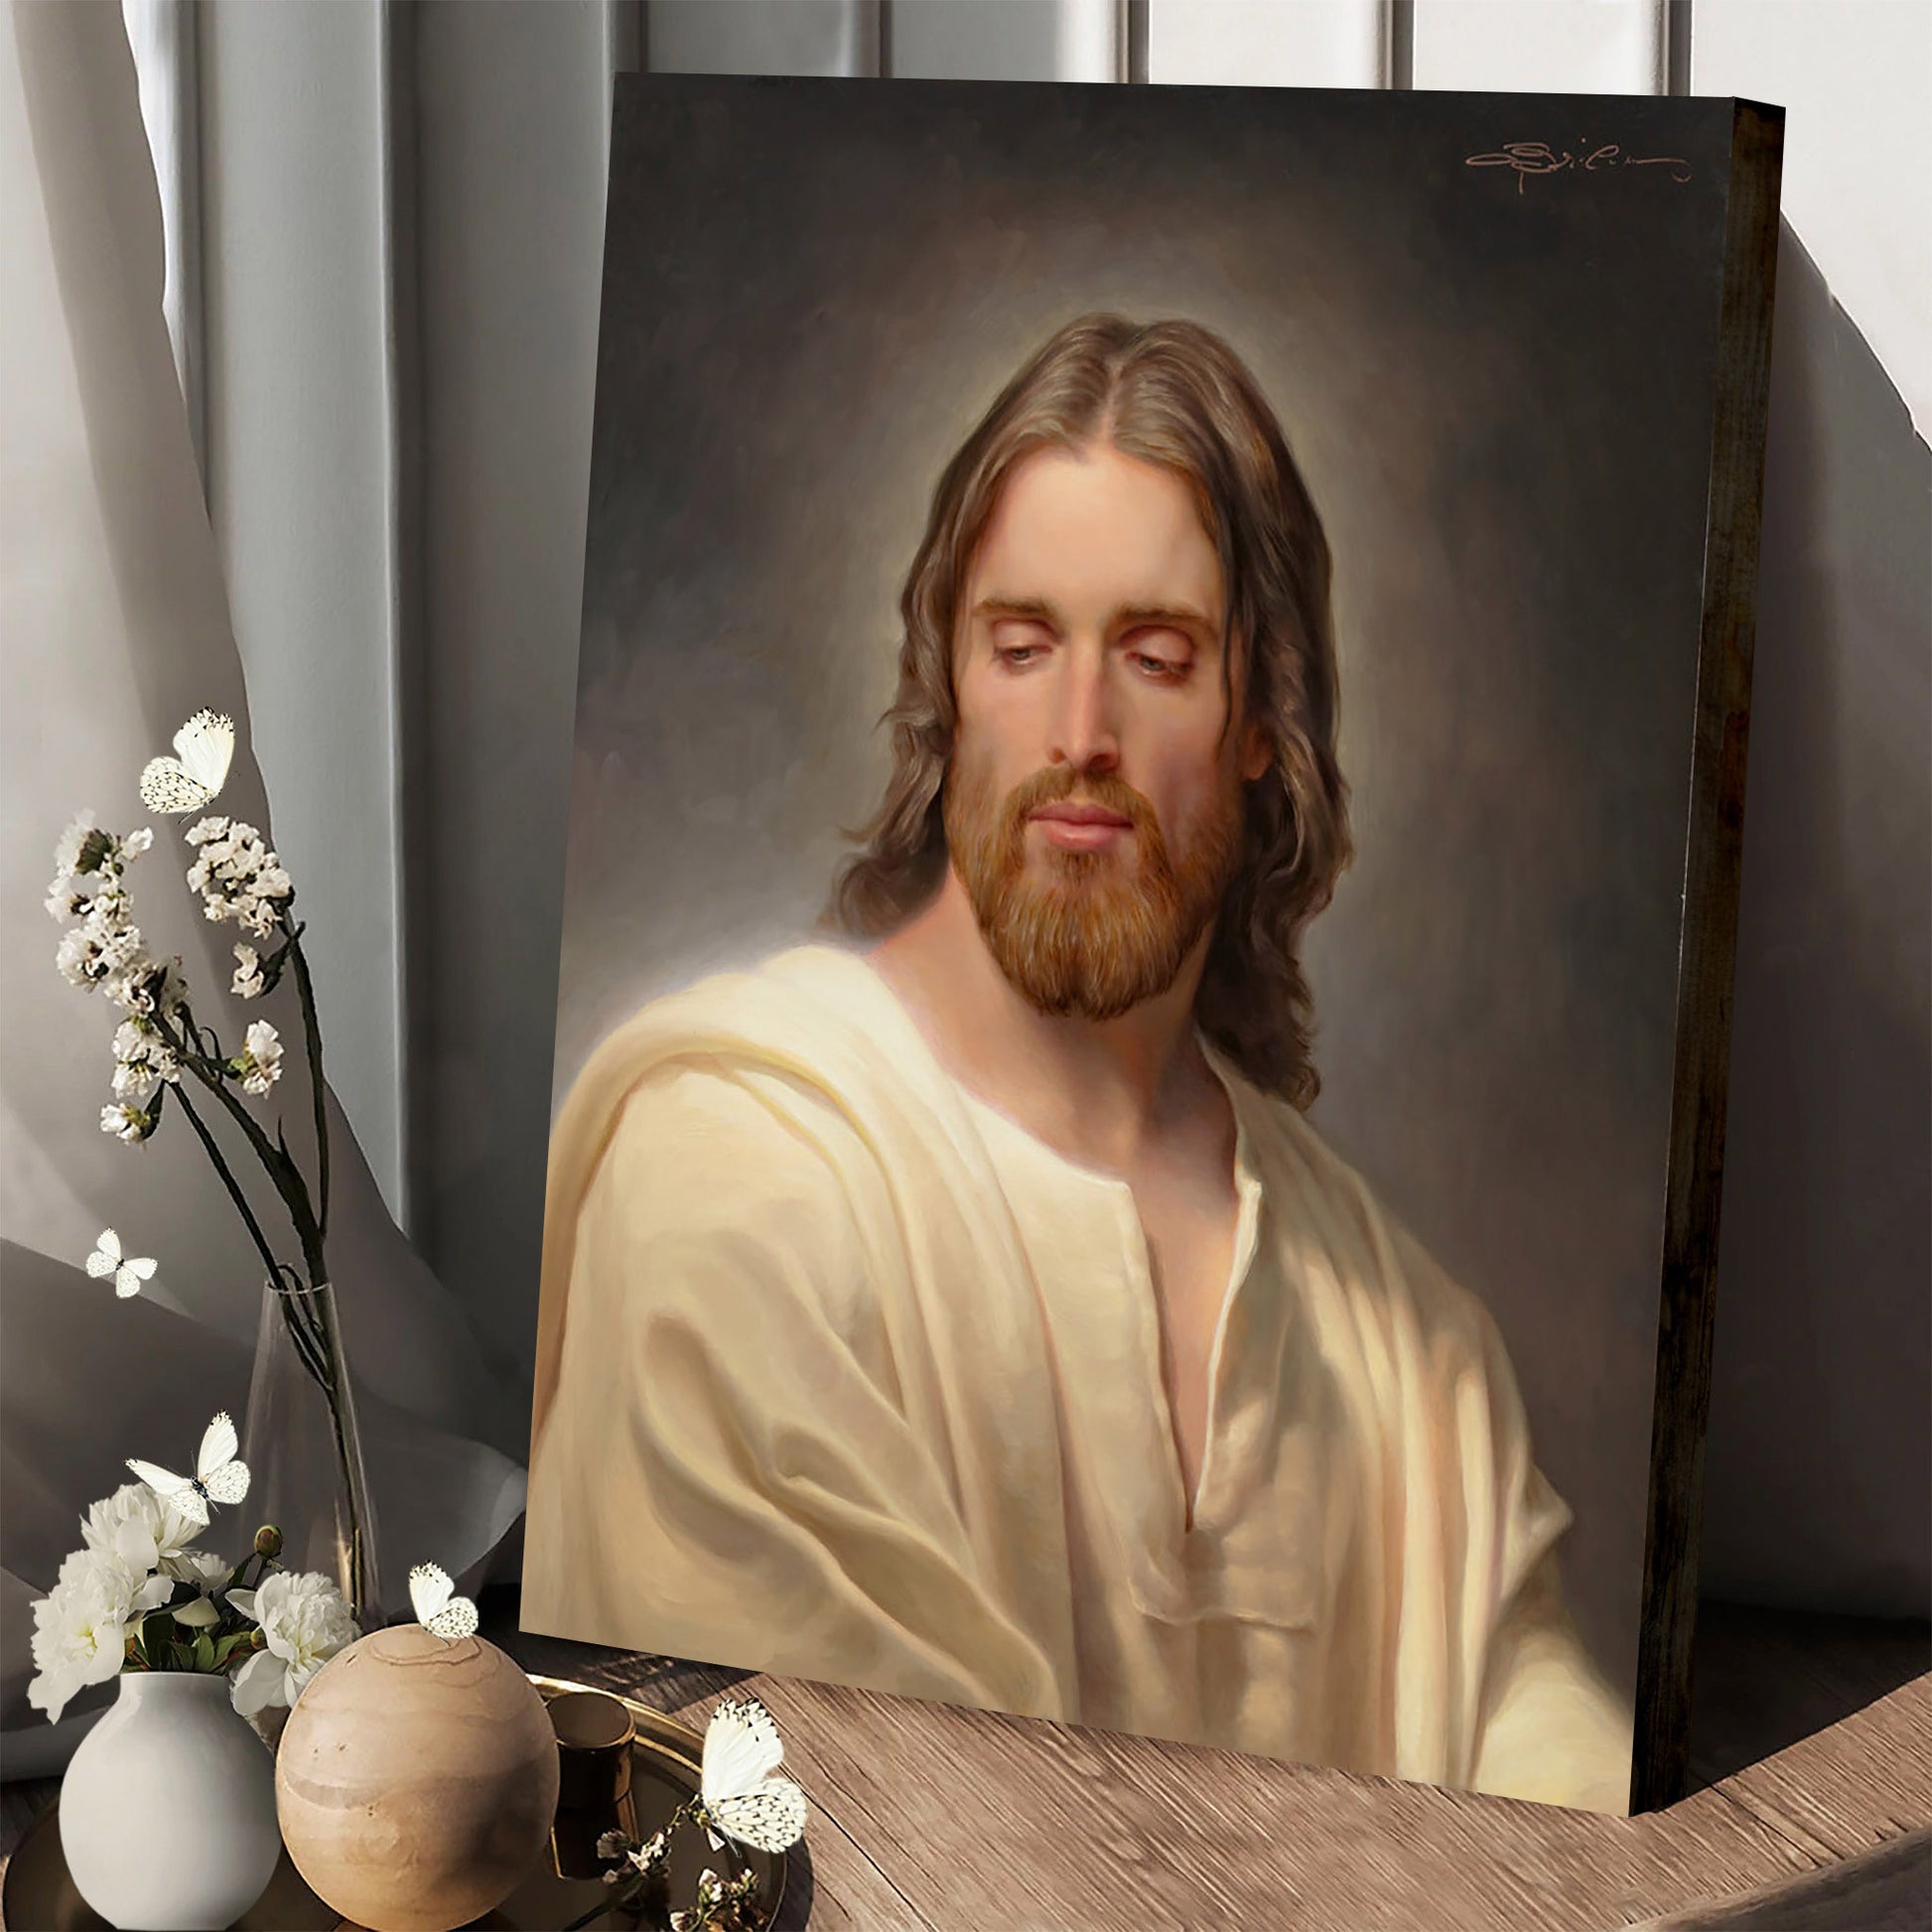 The Anointed One Canvas Picture - Jesus Christ Canvas Art - Christian Wall Canvas